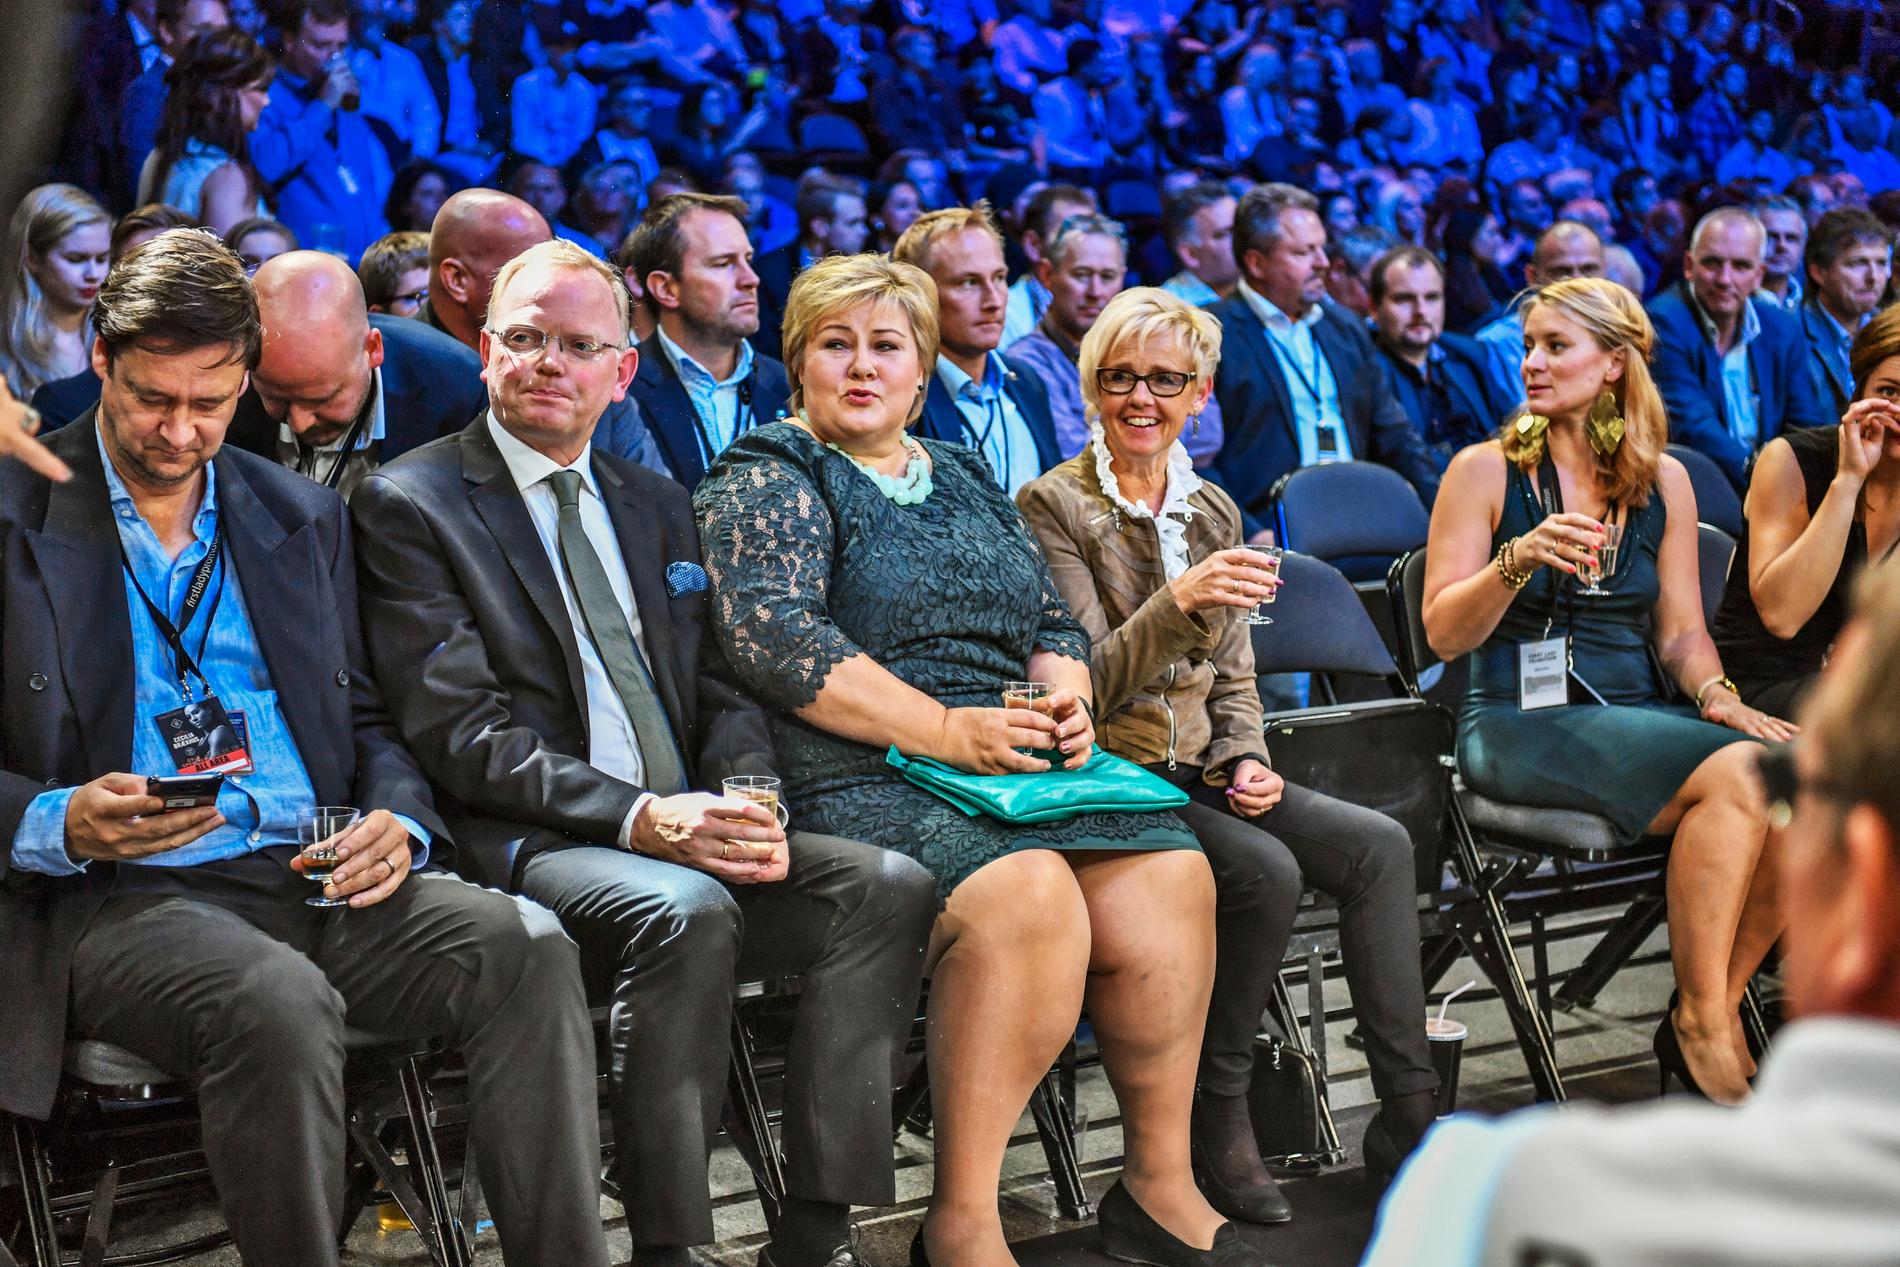 CLOSE: John Christian Elden and Sindre Finnes are friends.  Here with, among others, Erna Solberg at Cecilia Brækhus' boxing match in 2016.